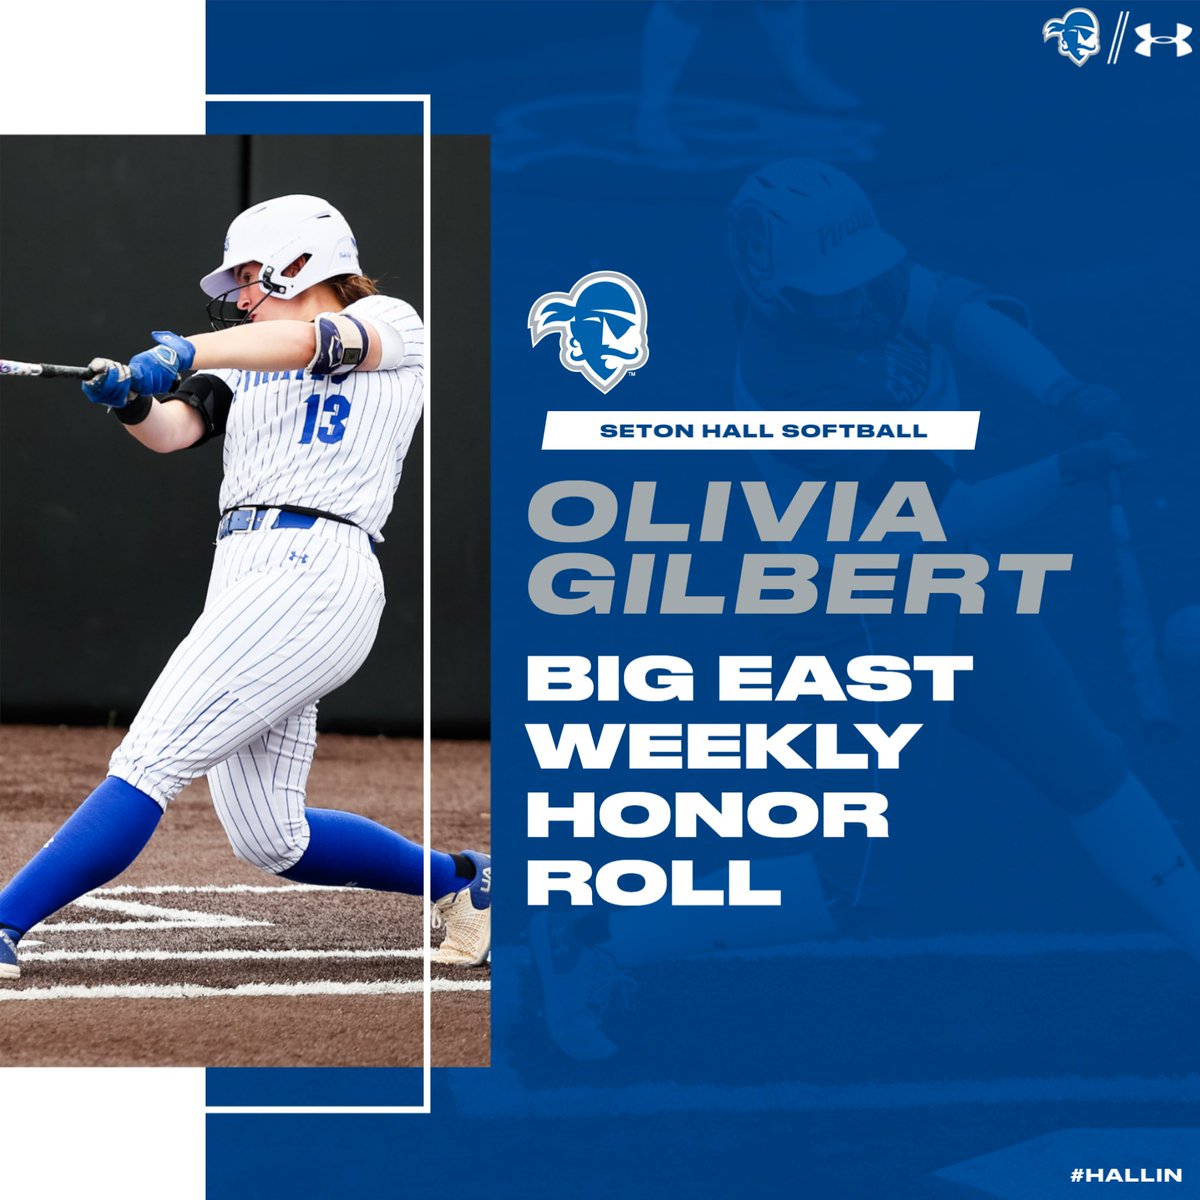 It was another strong weekend for OG, batting .625 and landing on the BIG EAST Weekly Honor Roll! #HALLin🔵⚪ | #HooksUp